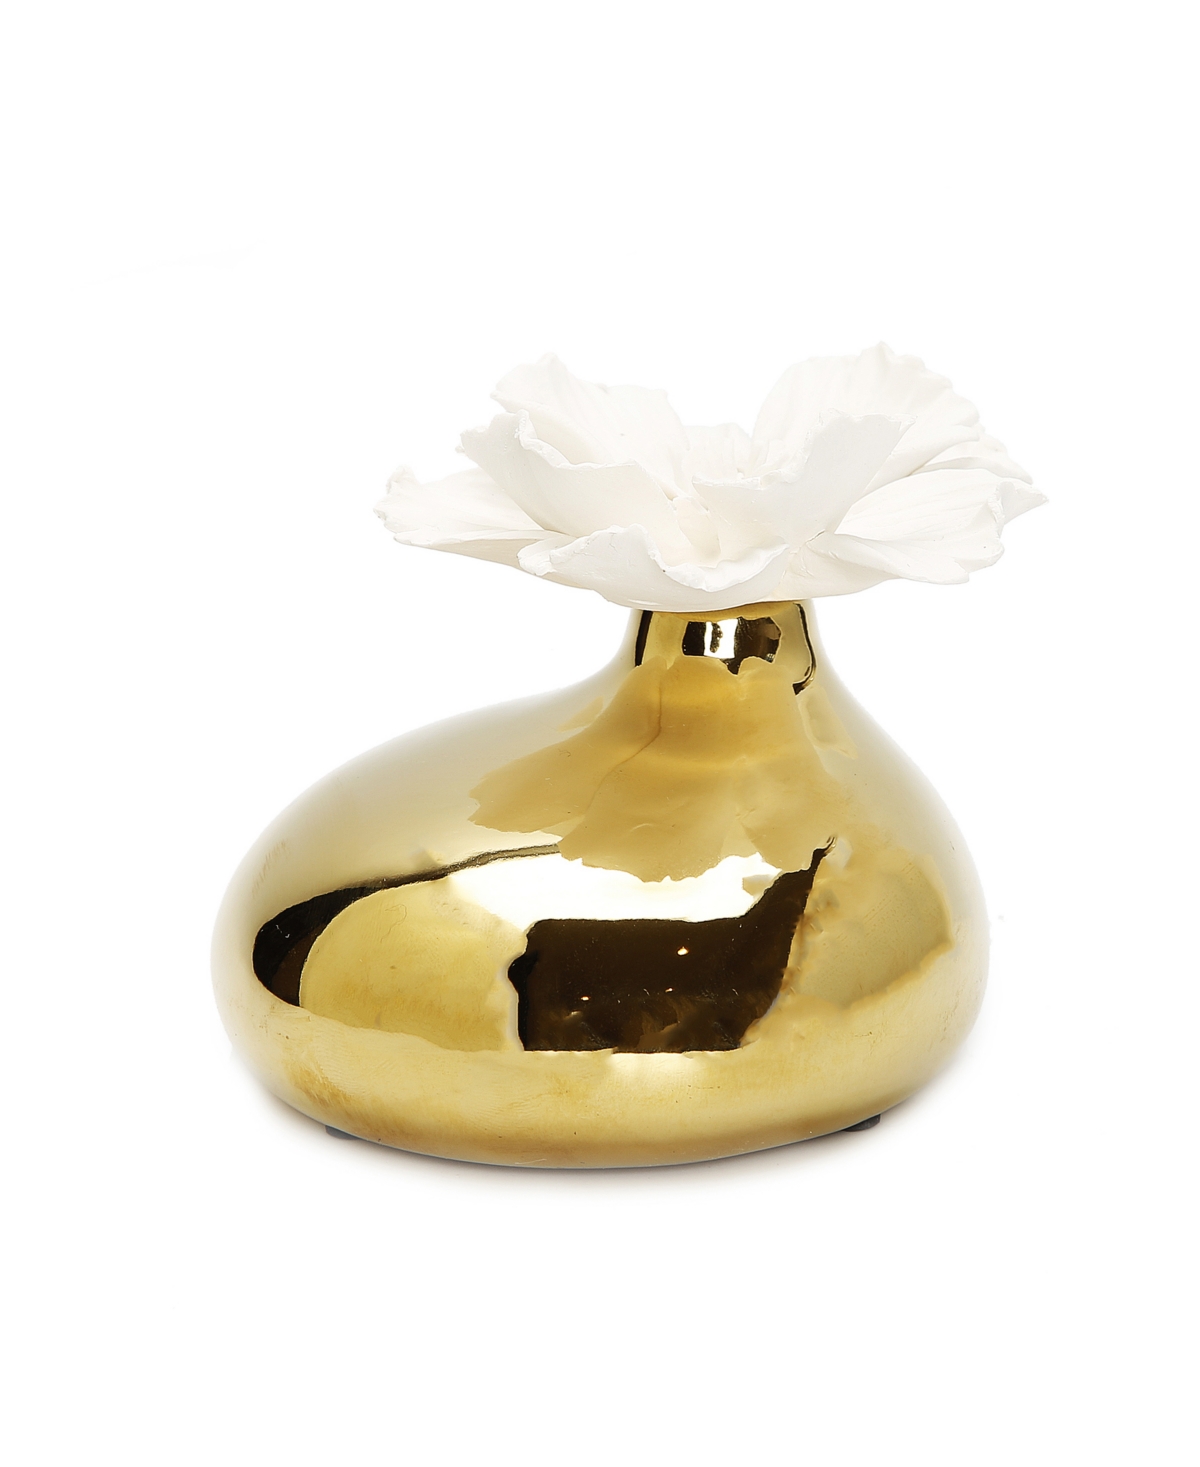 Diffuser with Dimensional Flower, 'Irish And Rose' Aroma - Gold